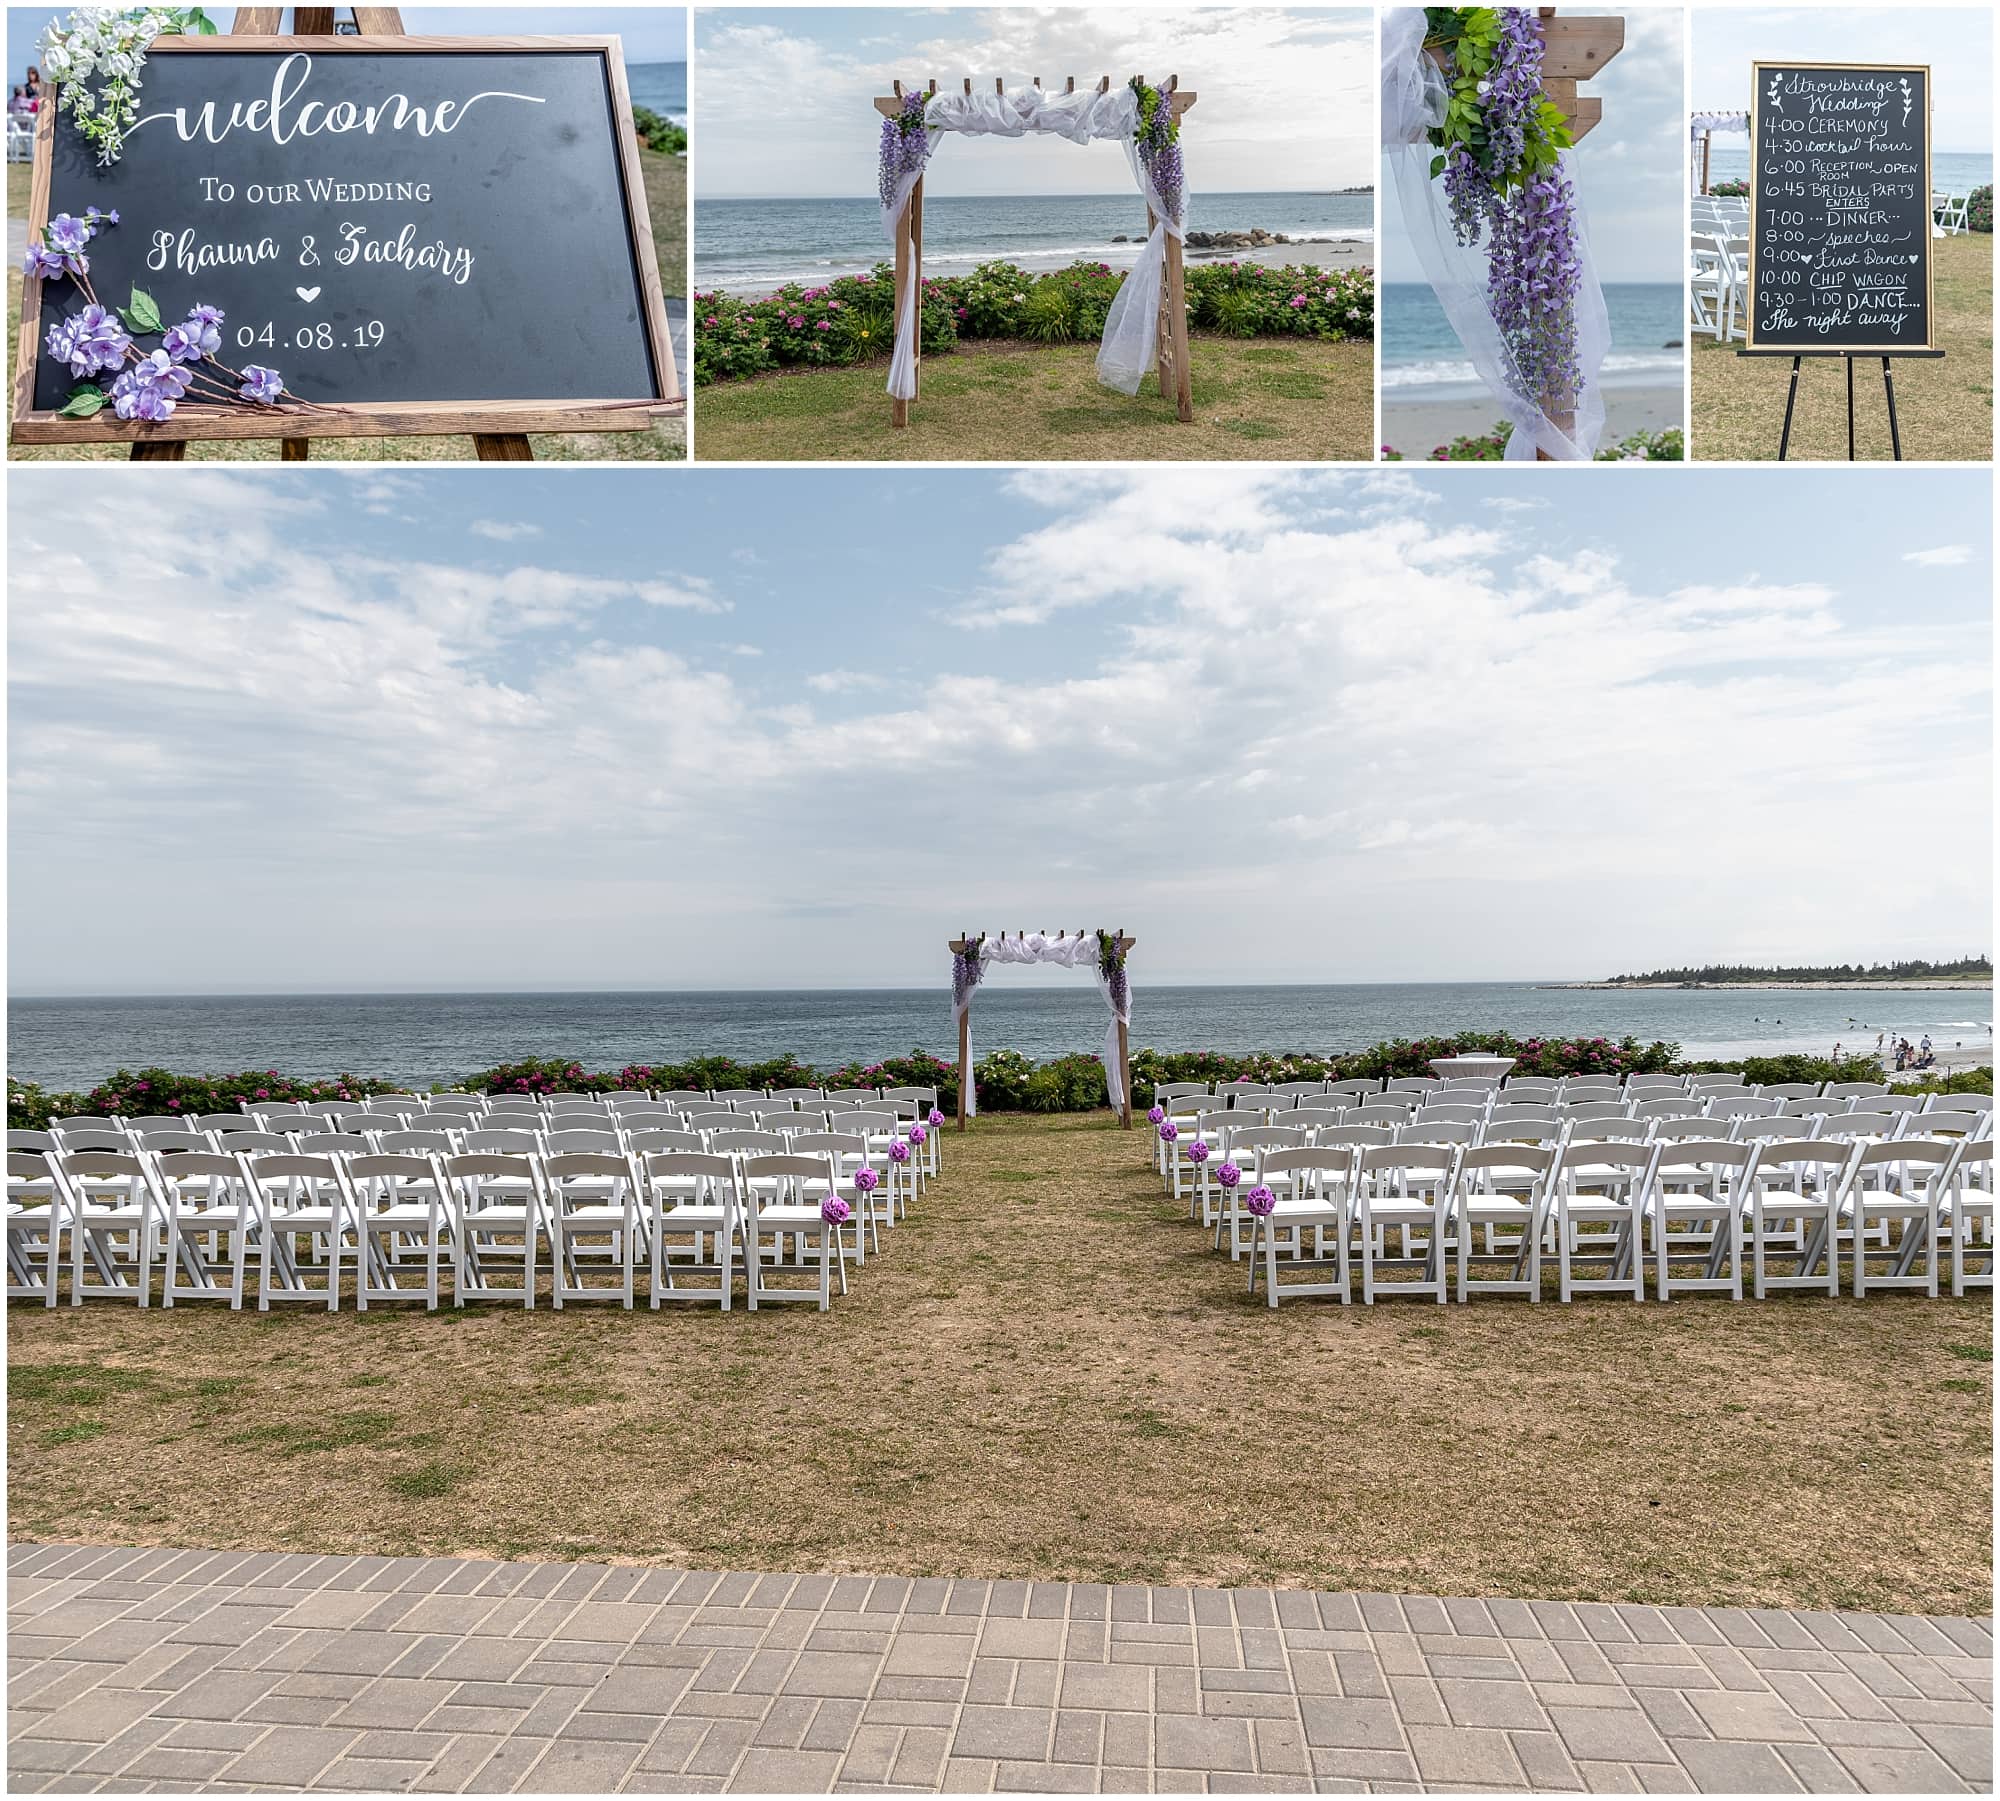 The wedding ceremony set up at White Point, NS.